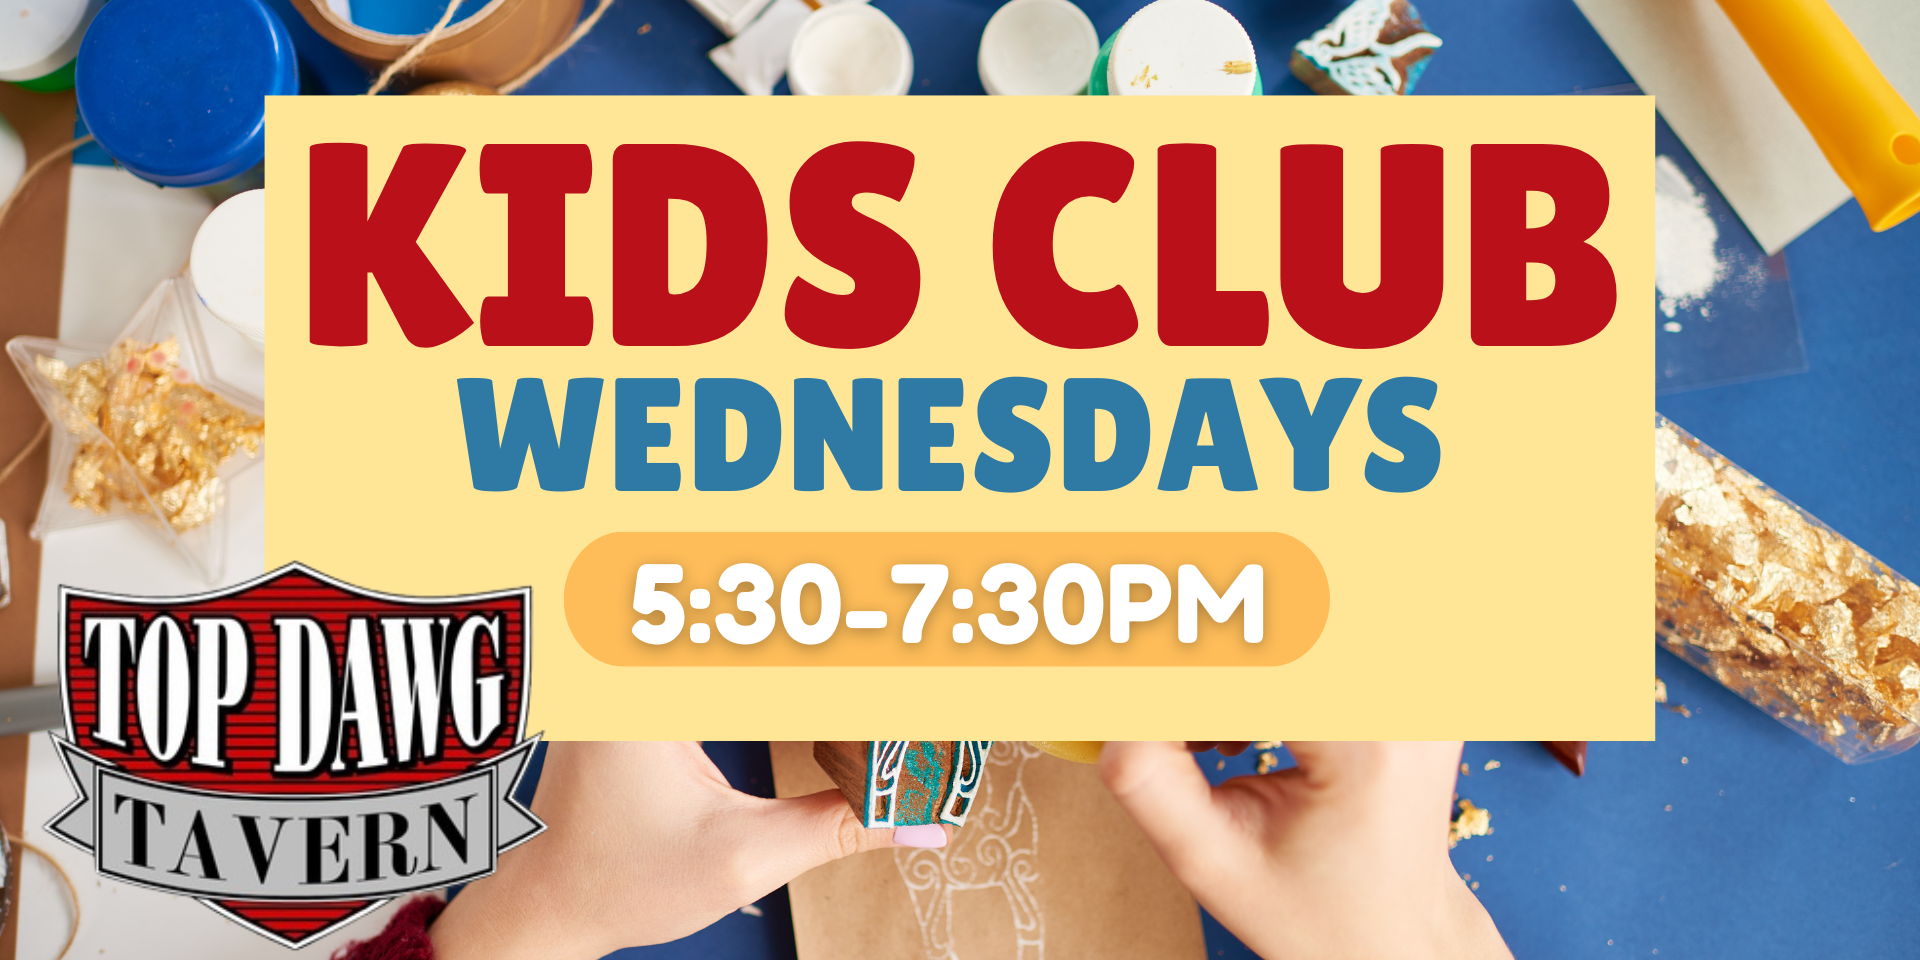 Kids Club at Top Dawg Tavern! promotional image